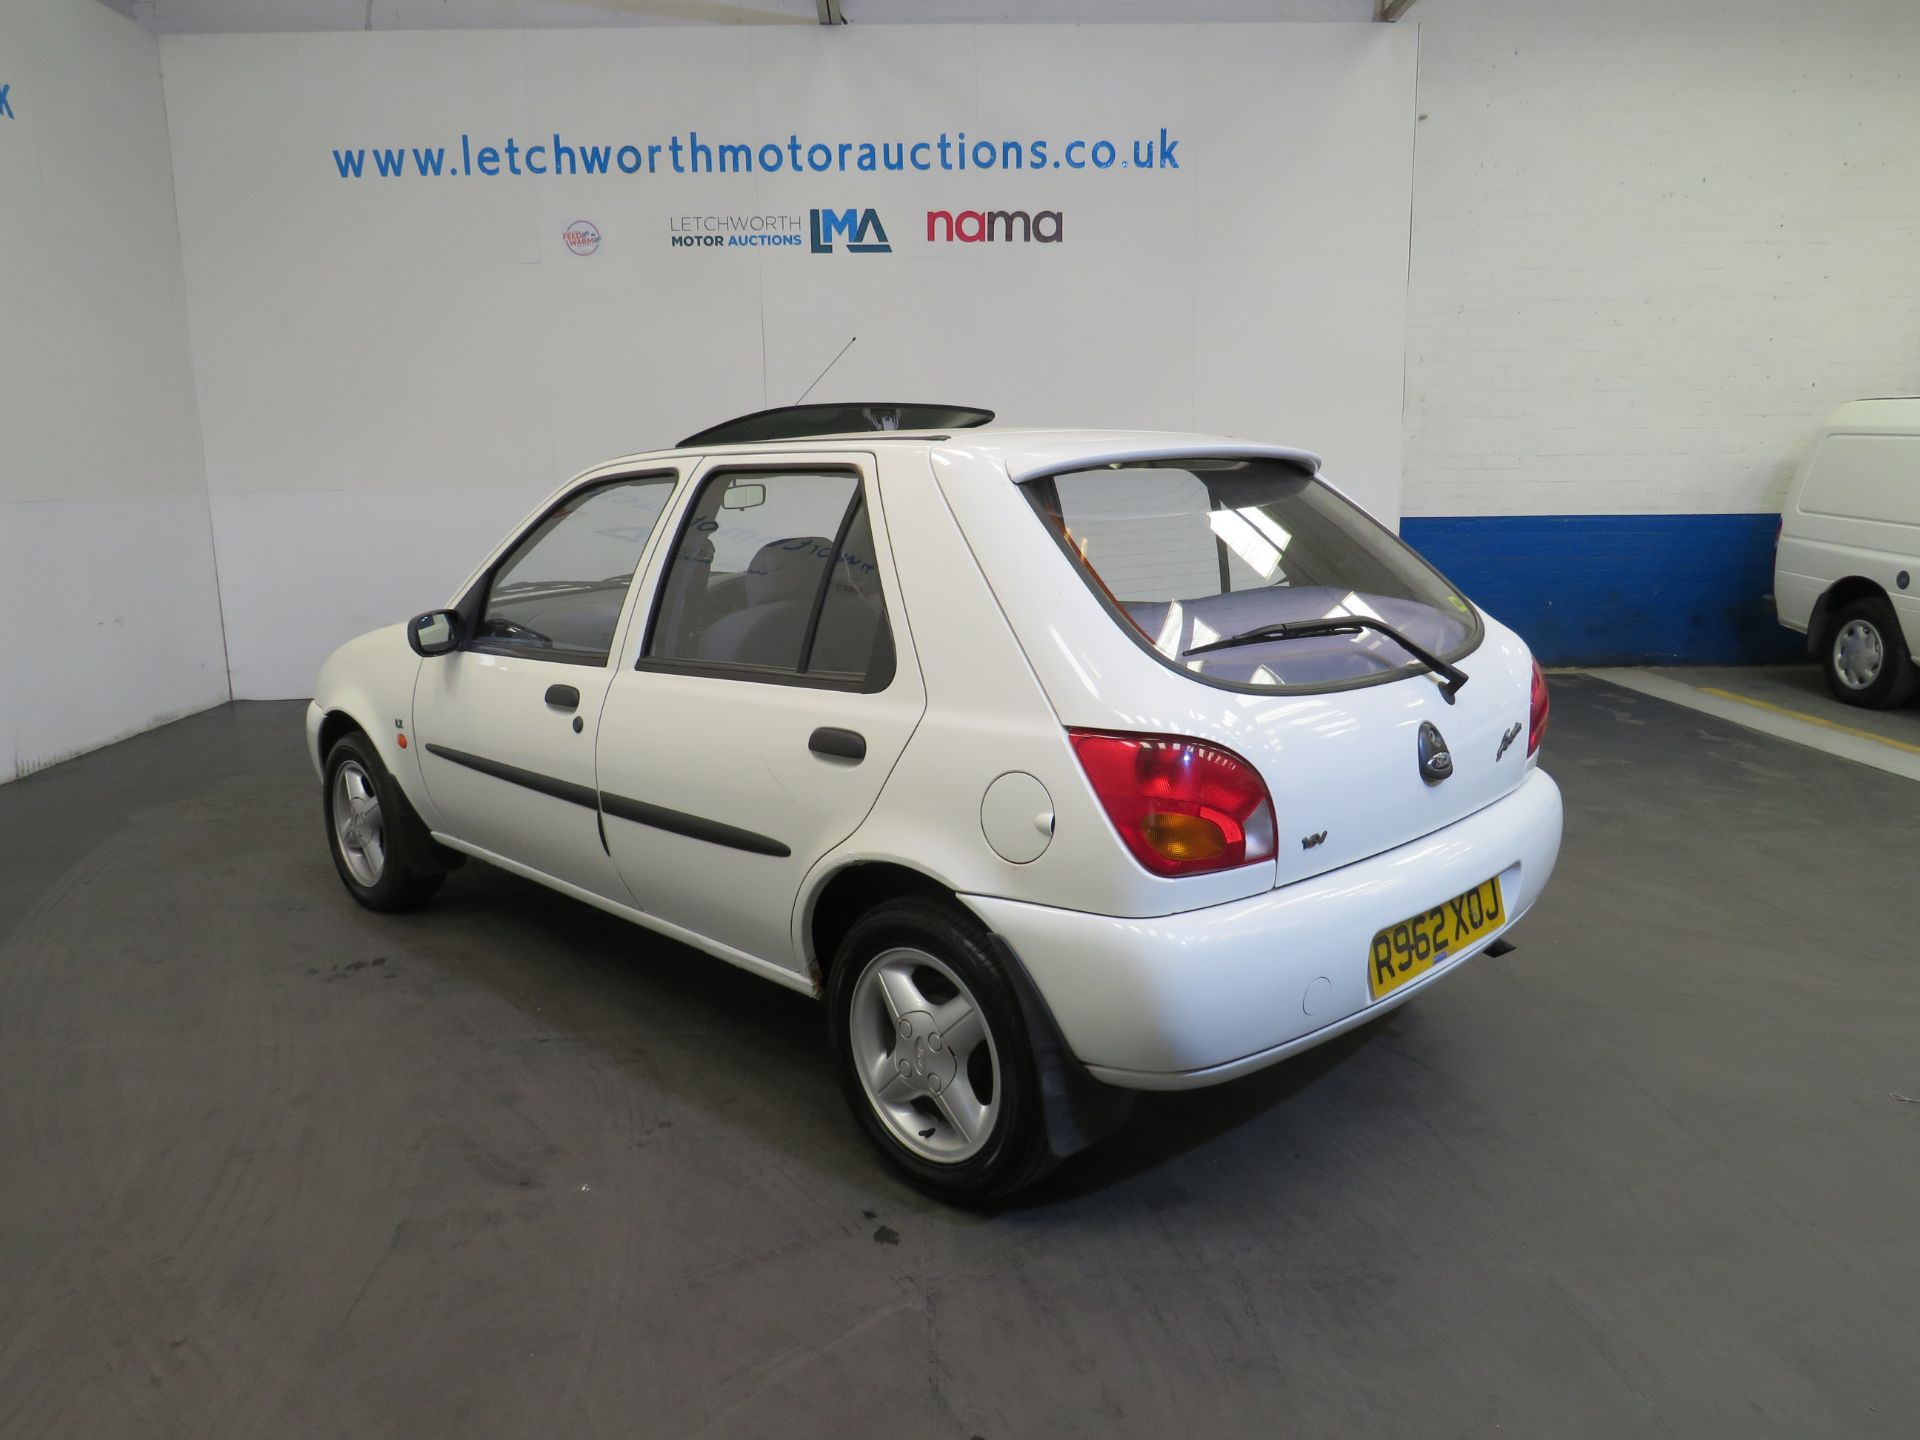 1998 Ford Fiesta LX - 1242cc - Image 4 of 15